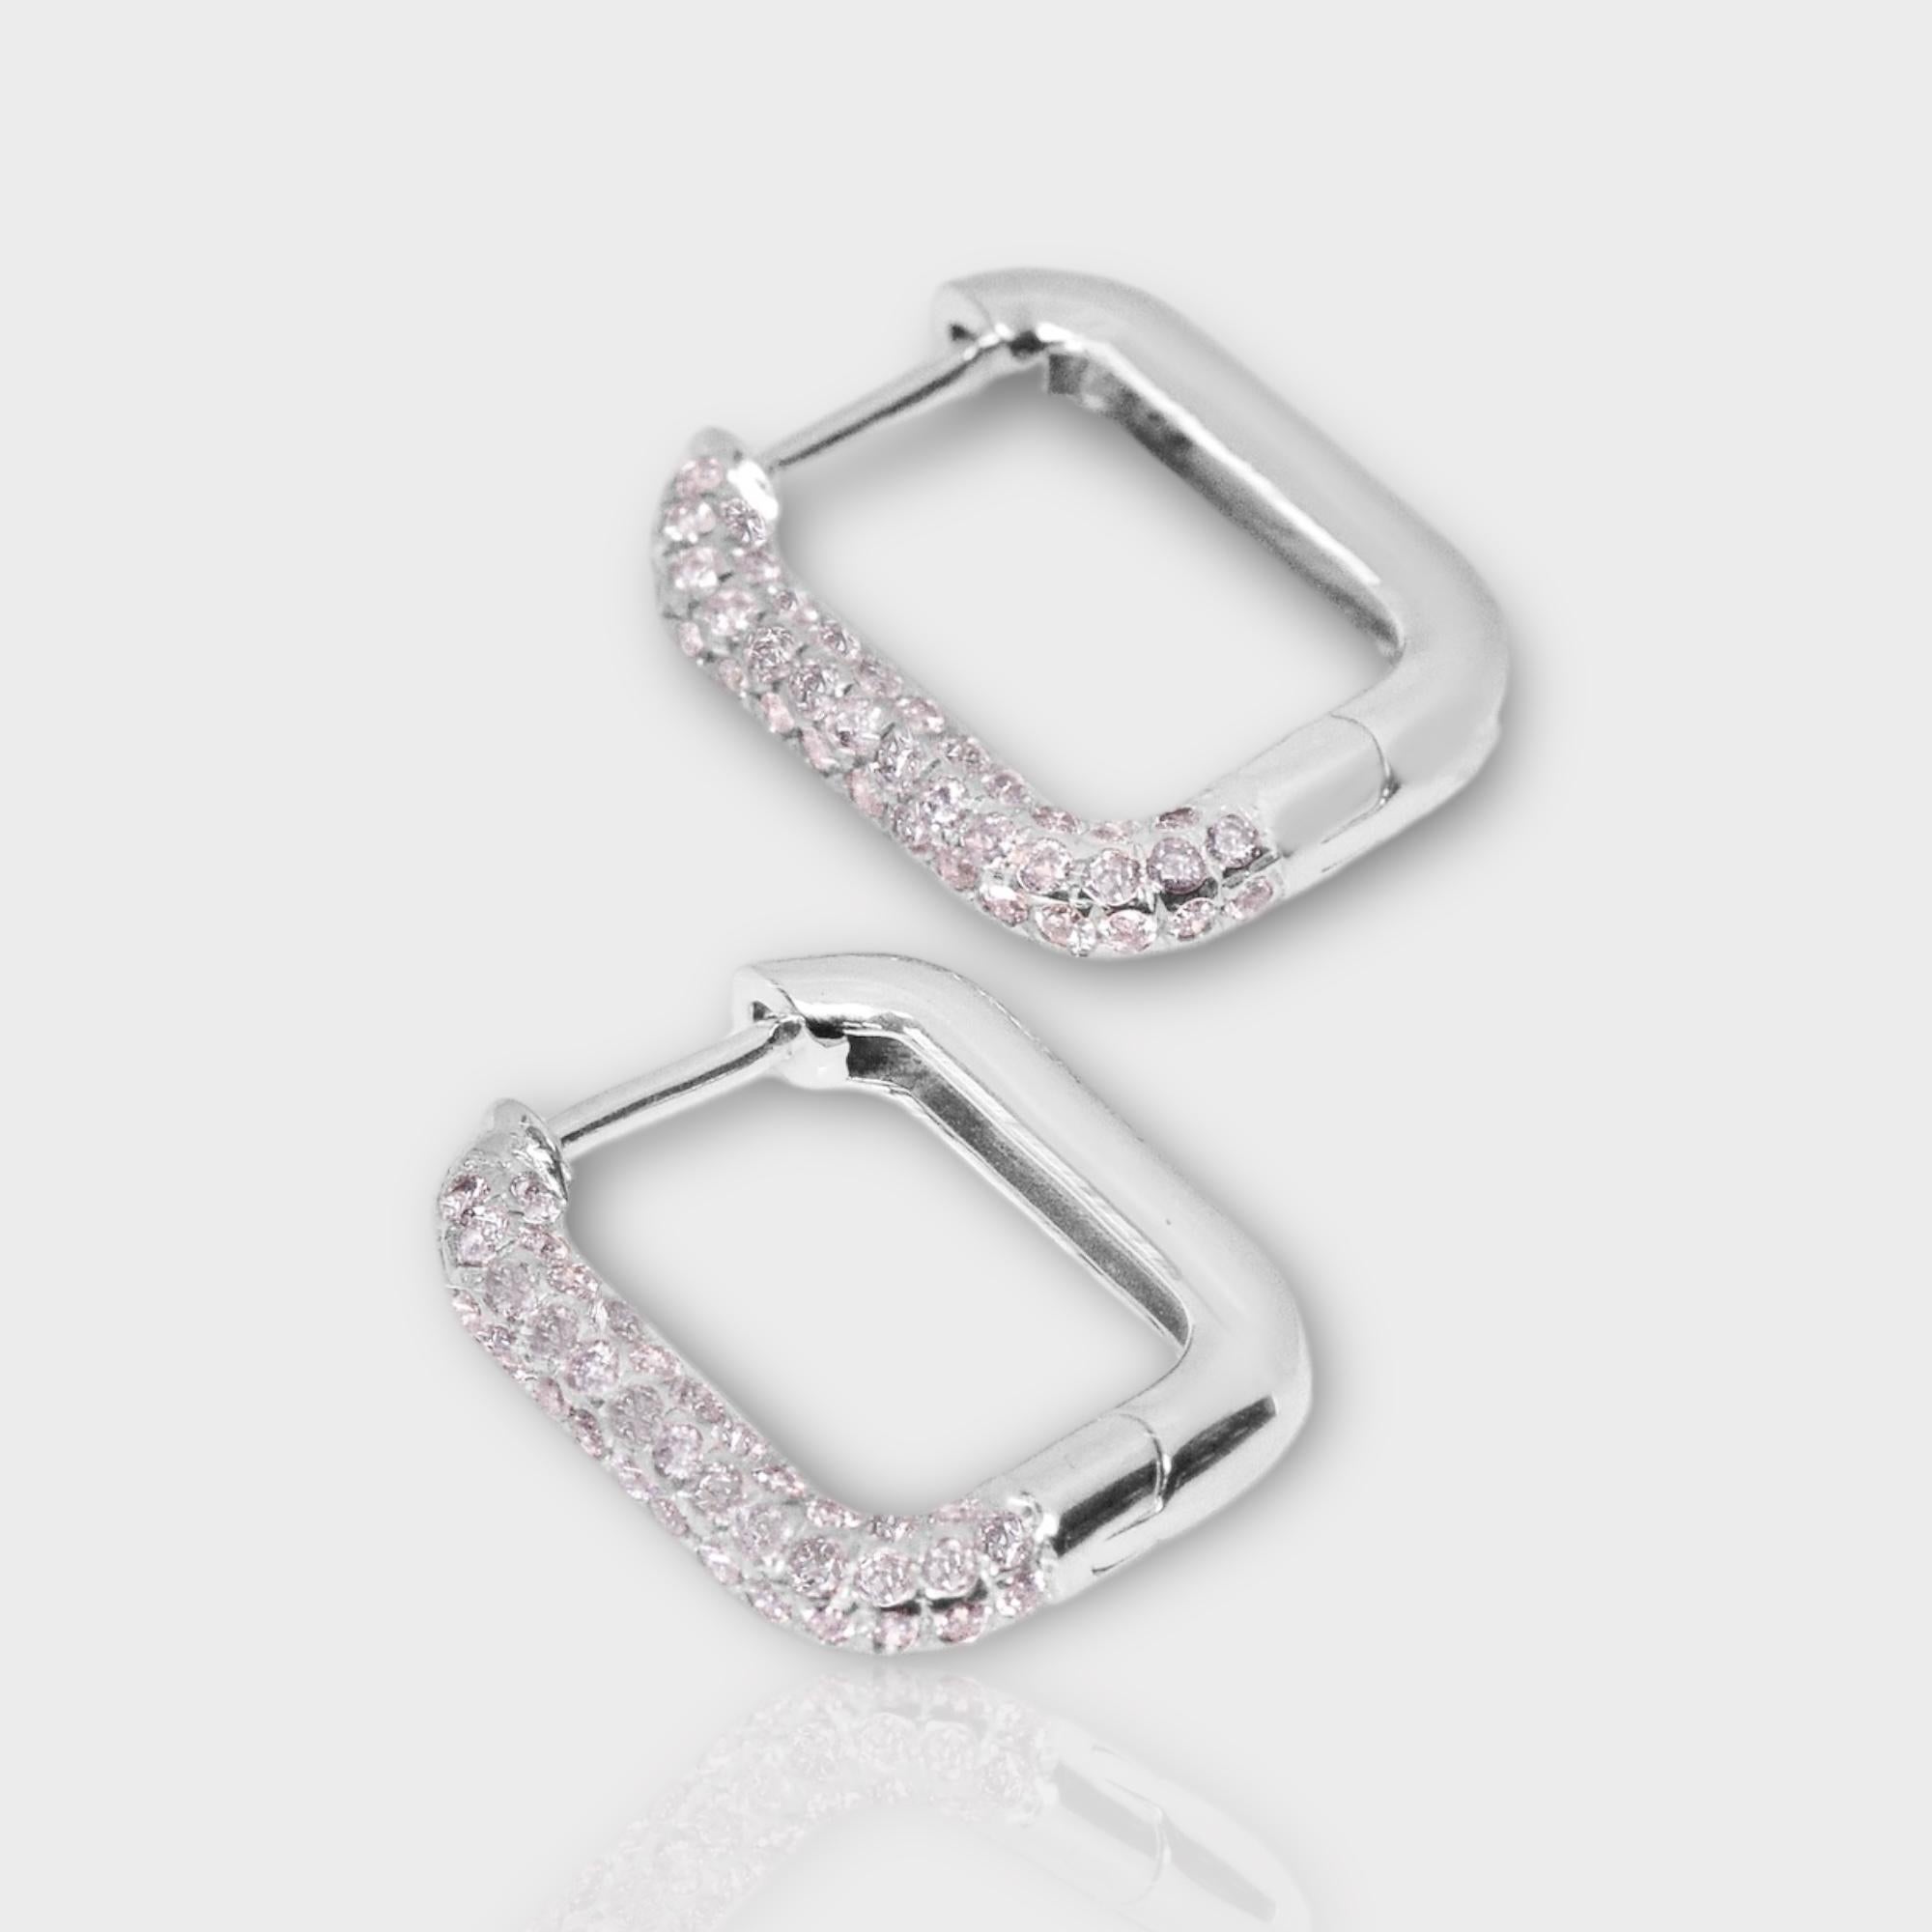 IGI 14K 0.68 ct Natural Pink Diamonds Hoop Earrings In New Condition For Sale In Kaohsiung City, TW